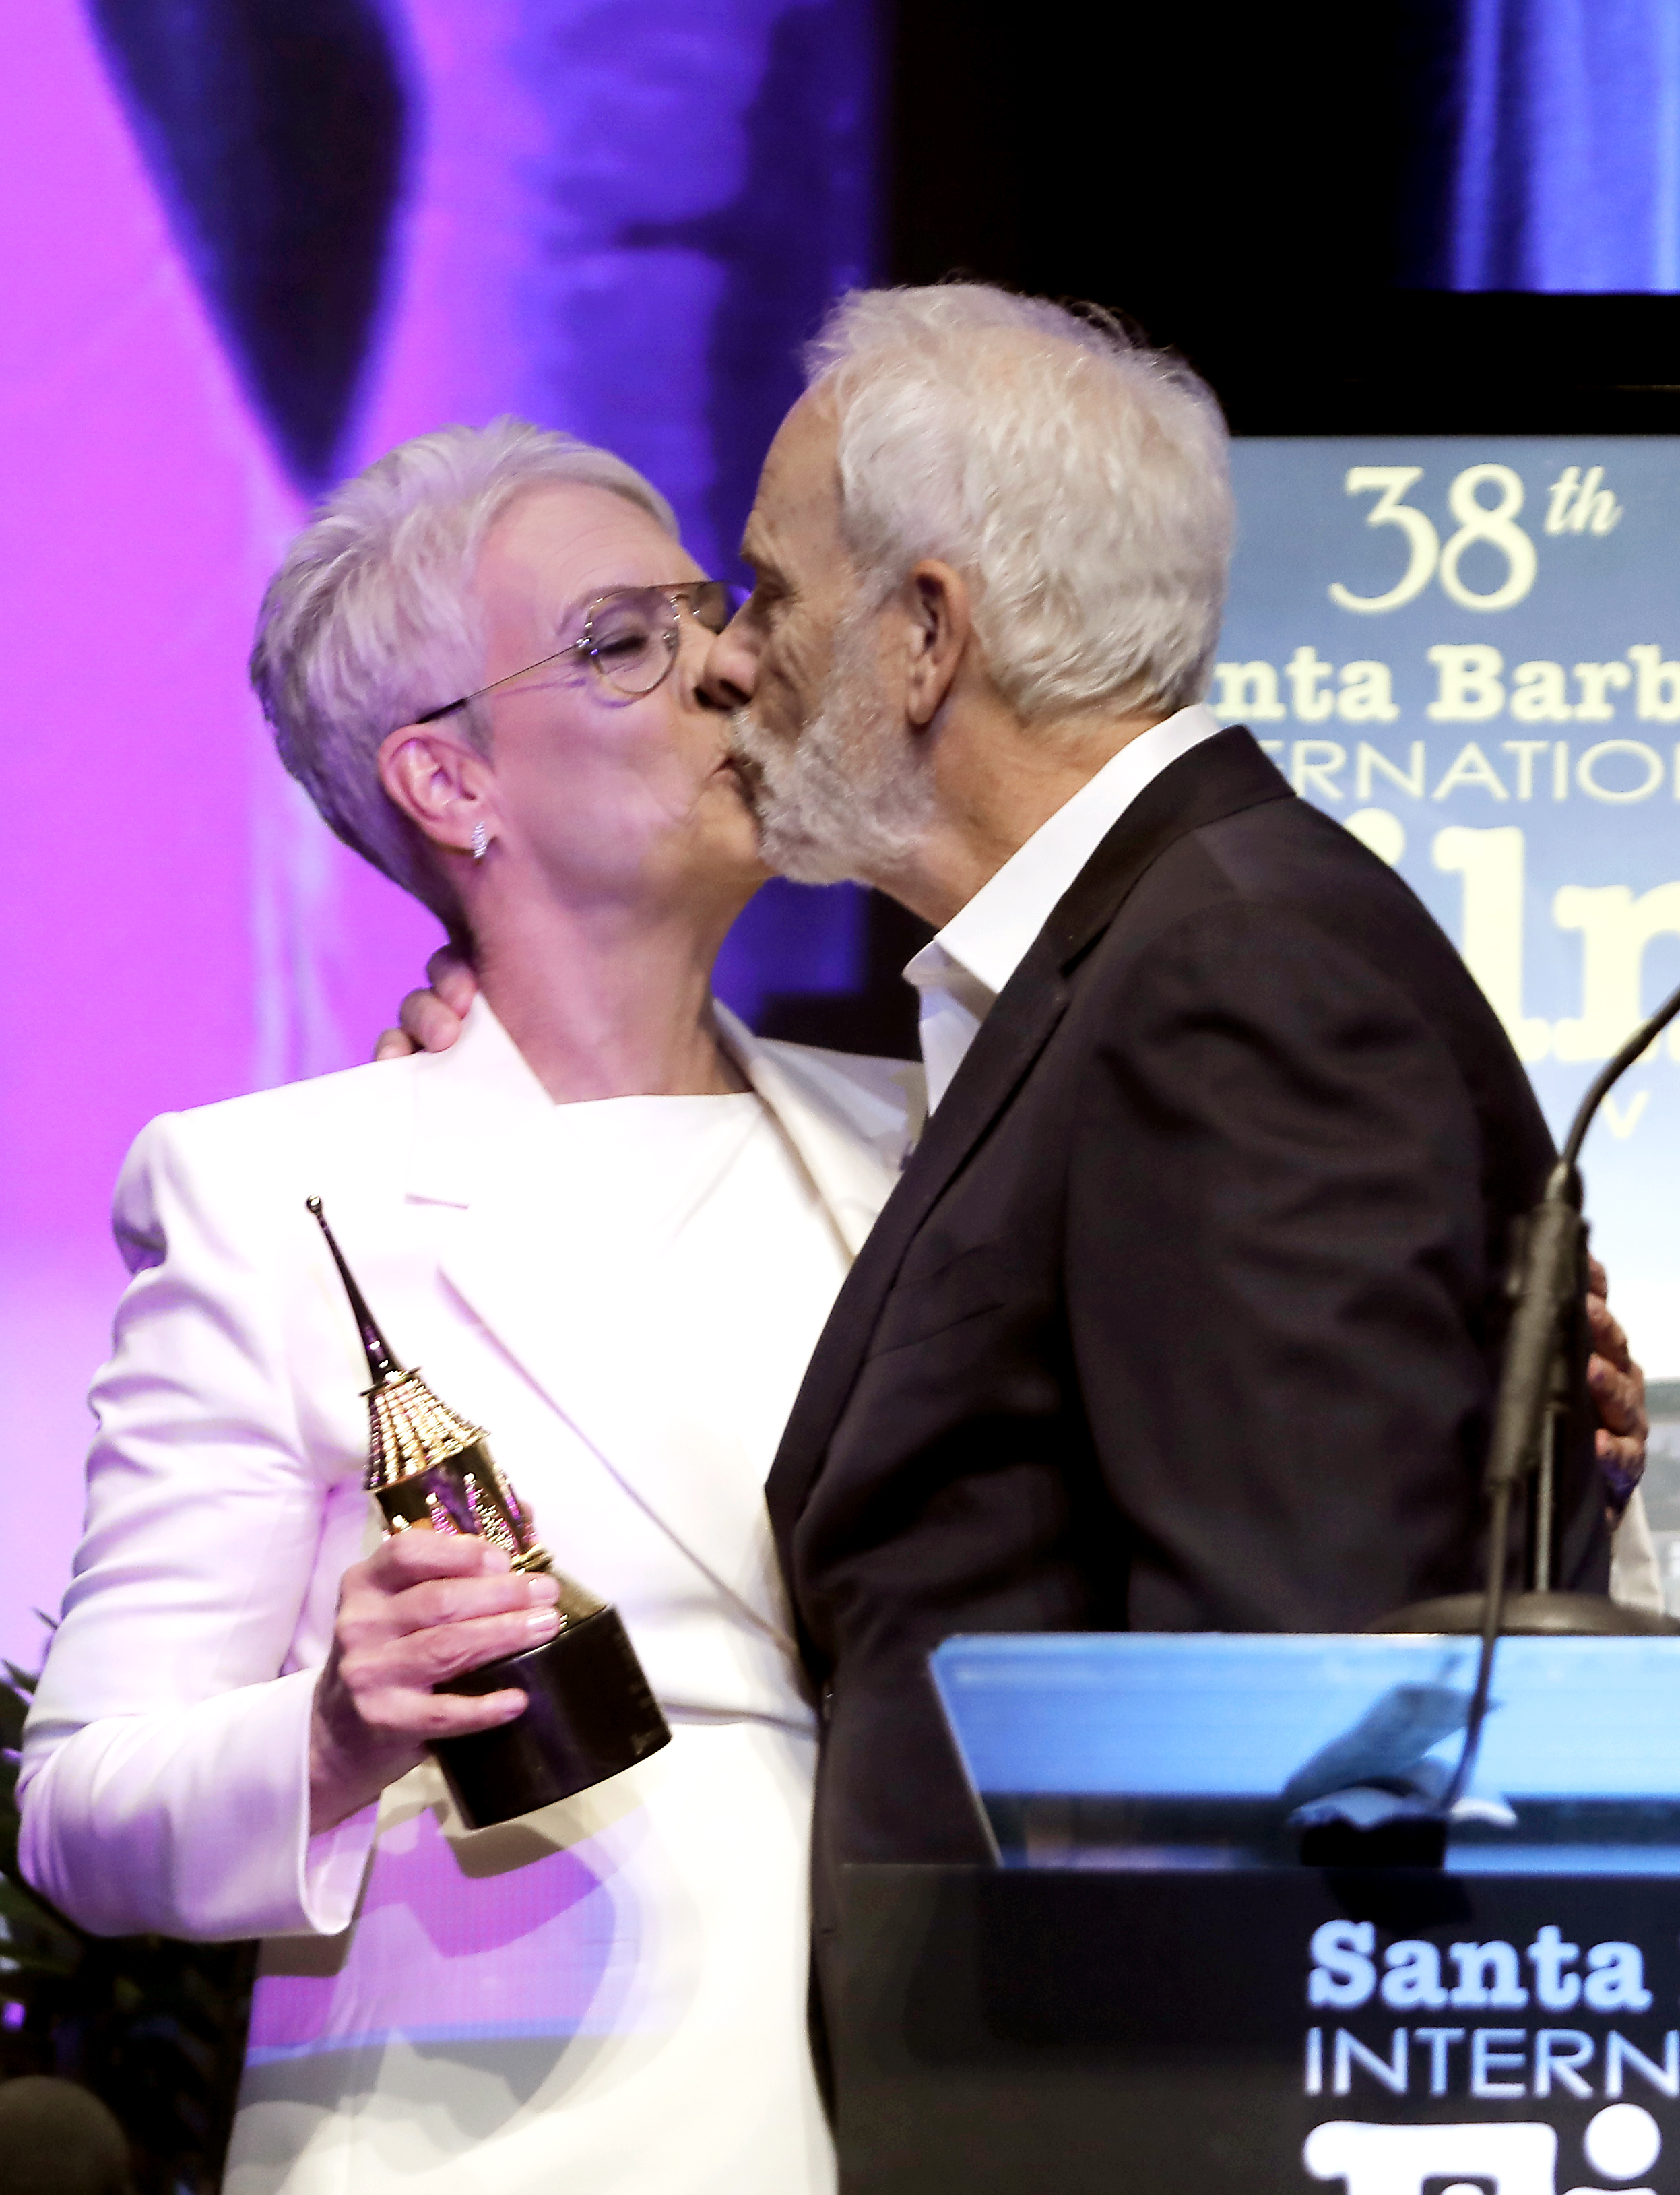 Christopher Guest presents Jamie Lee Curtis with the Modern Master Award at the Maltin Modern Master Award ceremony during the 38th Annual Santa Barbara International Film Festival at Arlington Theatre in Santa Barbara, California on February 11, 2023. | Source: Getty Images